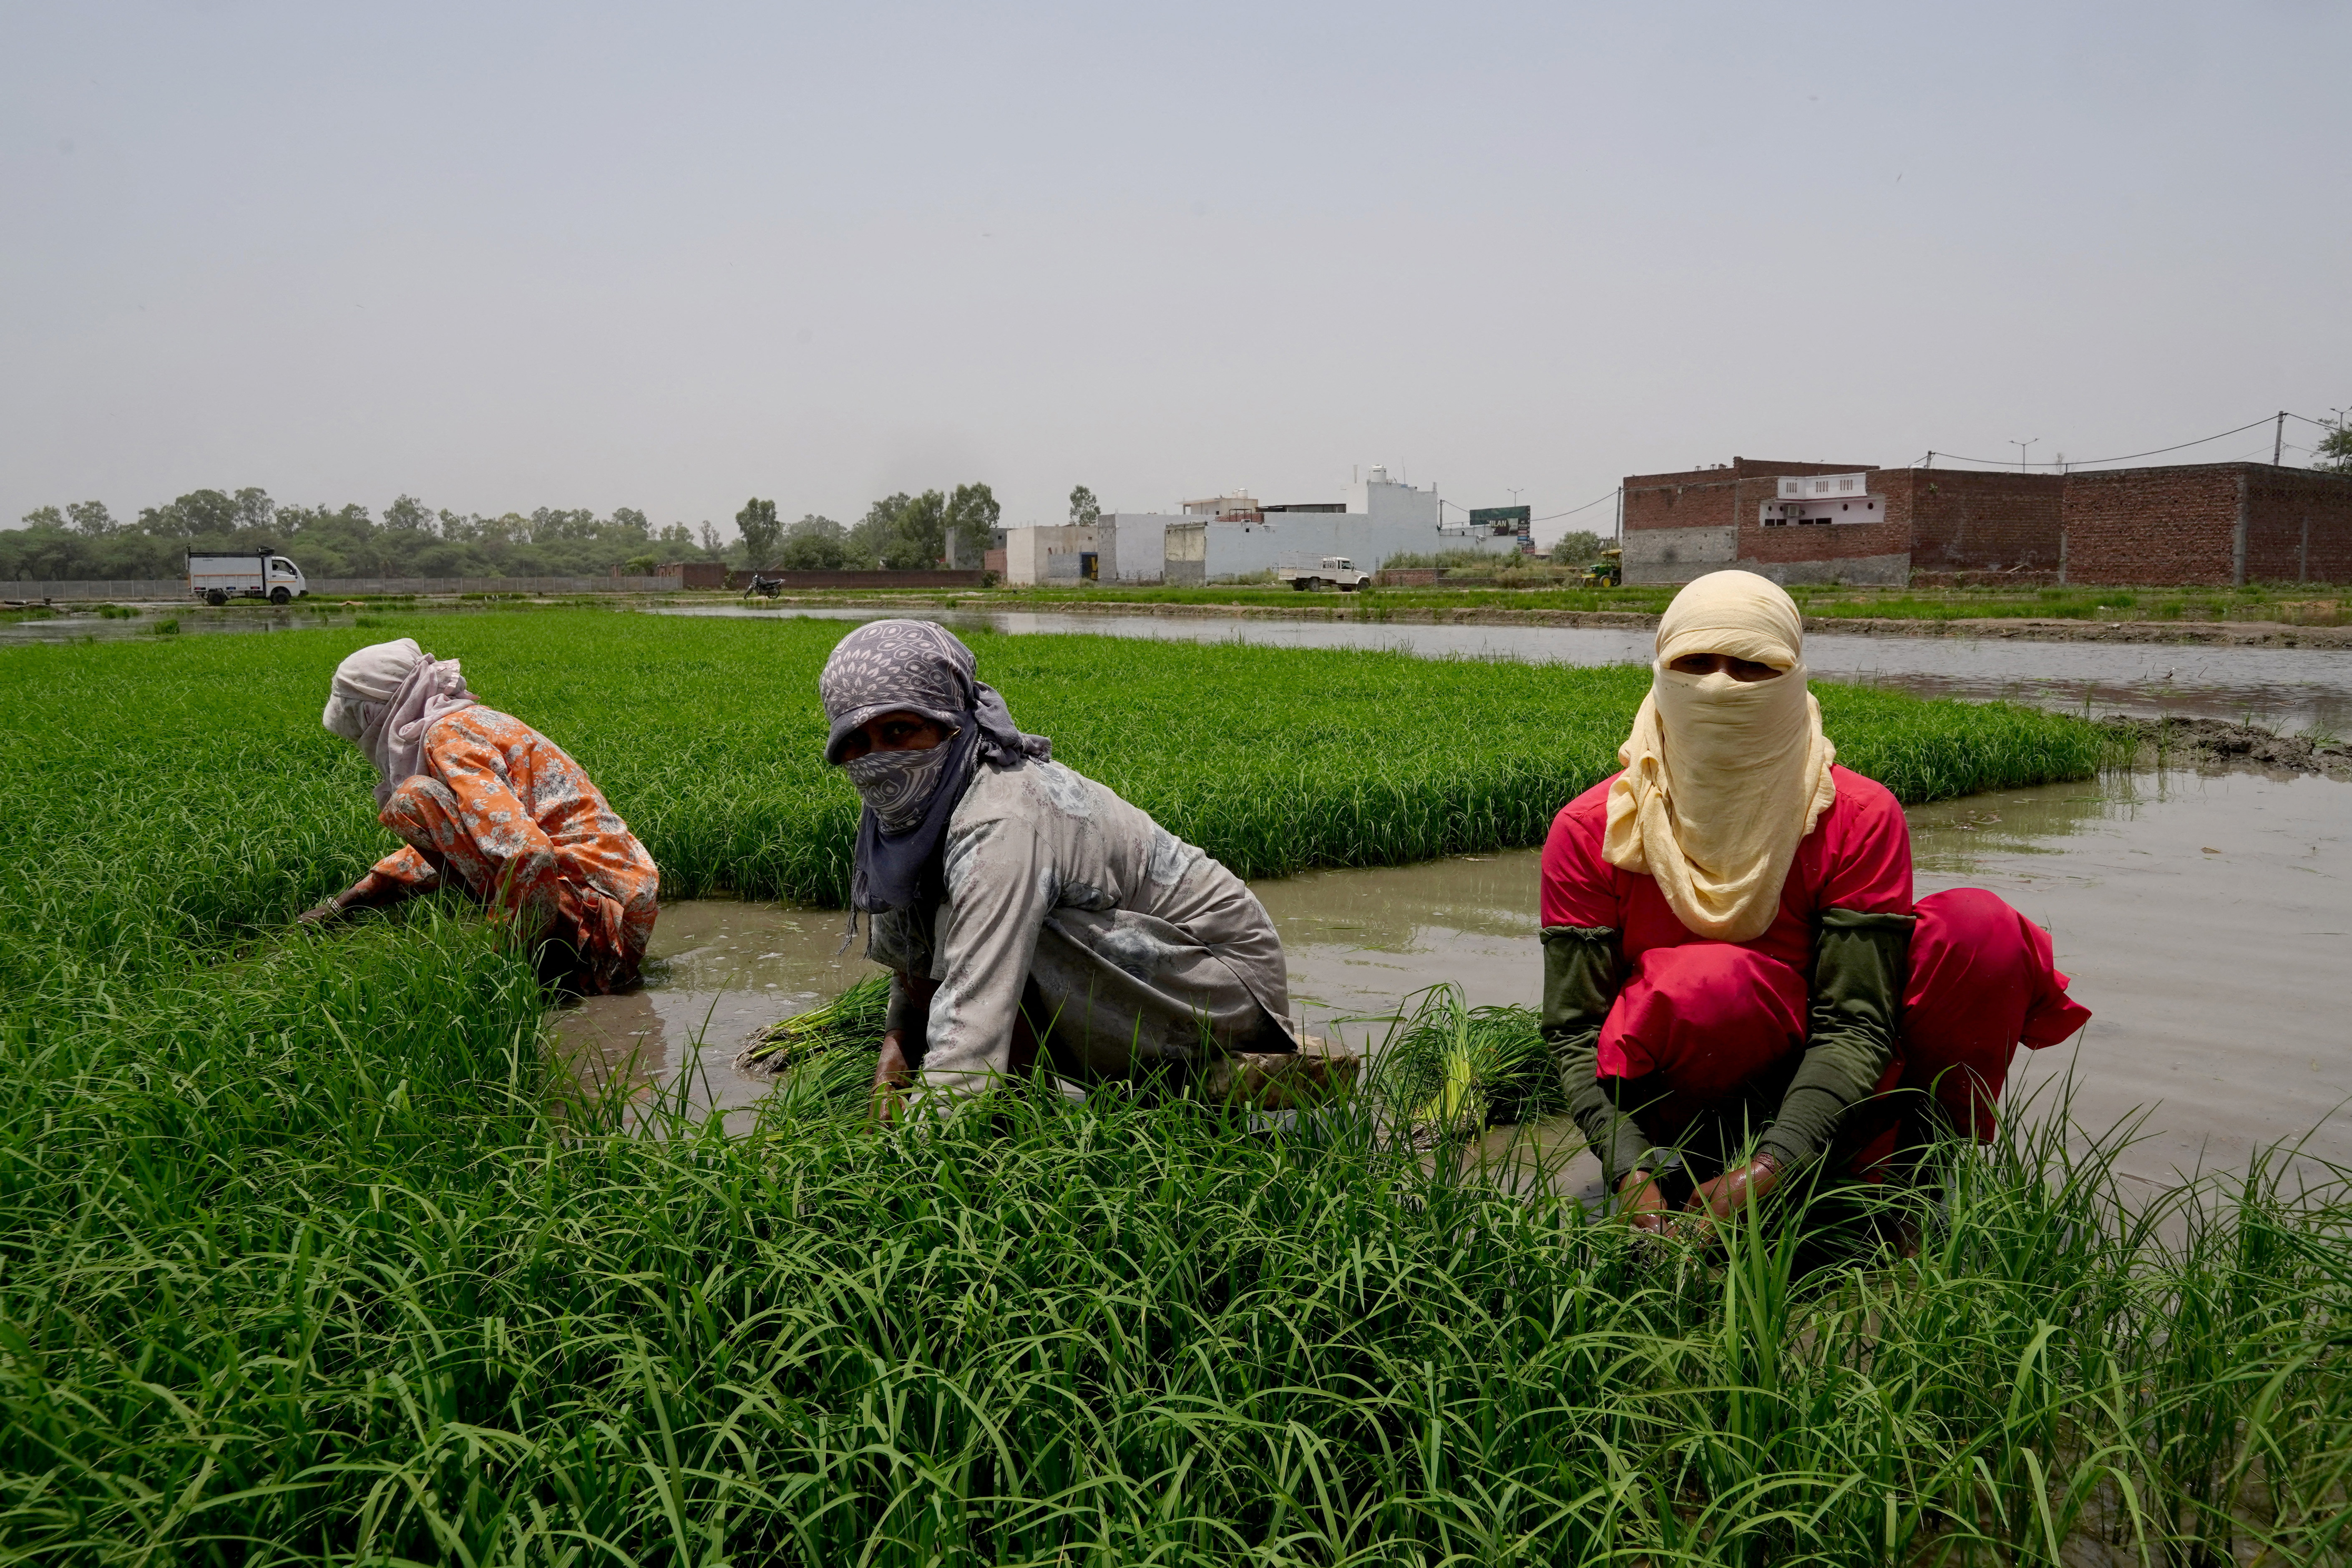 Farm labourers work on a paddy field in Karnal, India